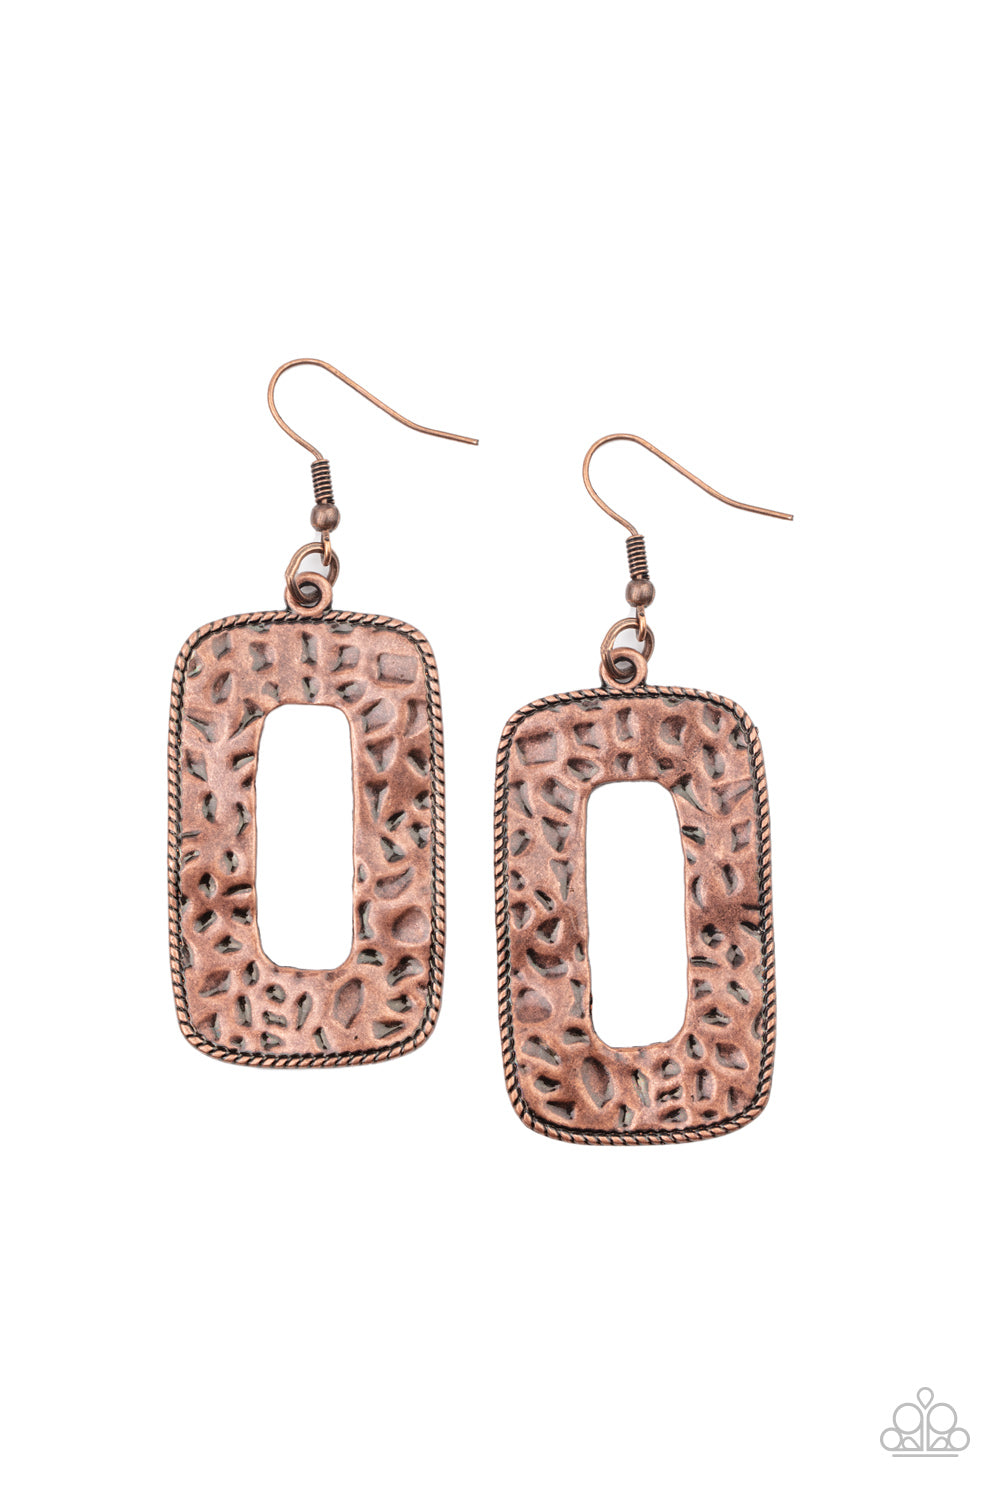 Paparazzi Primal Elements - Copper Earrings - A Finishing Touch 